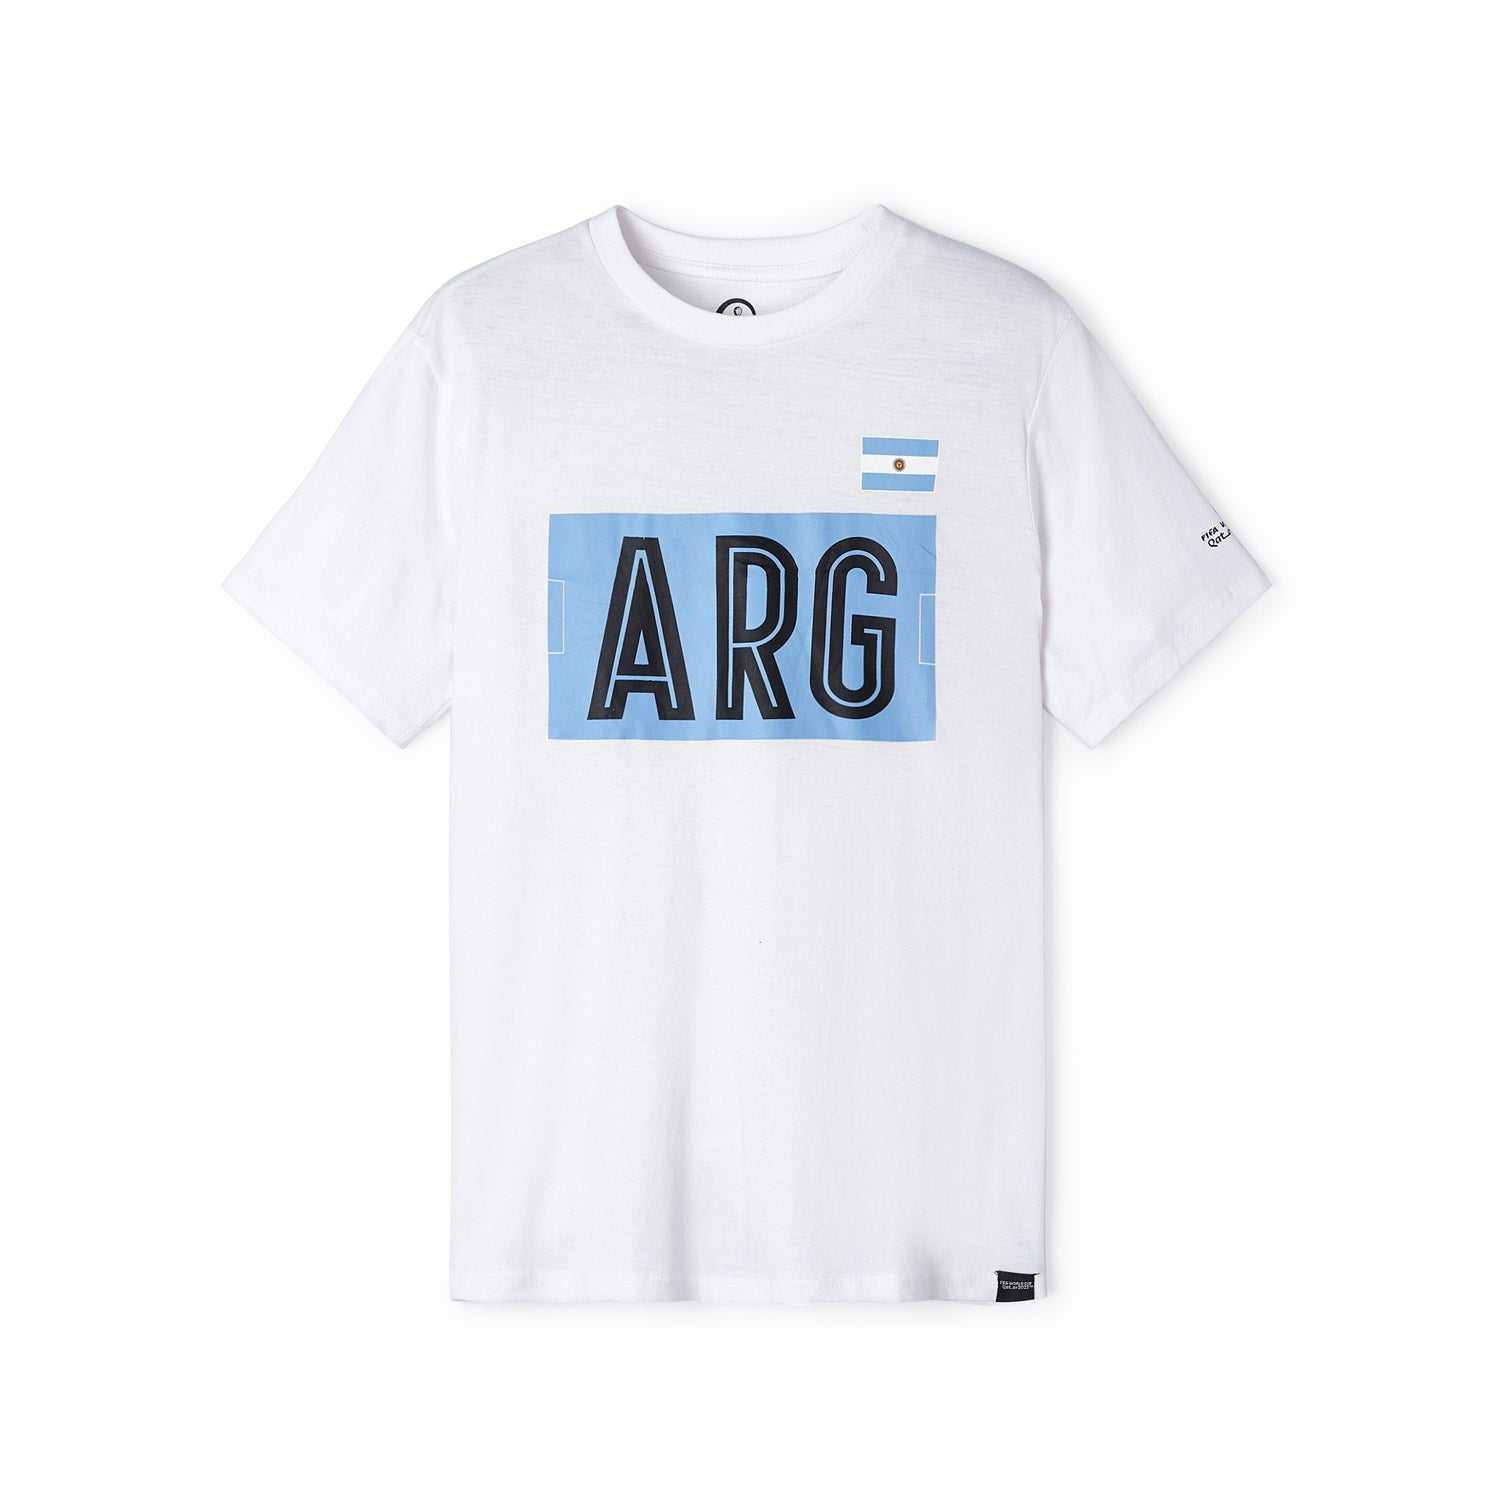 2022 World Cup Argentina White T-Shirt - Mens